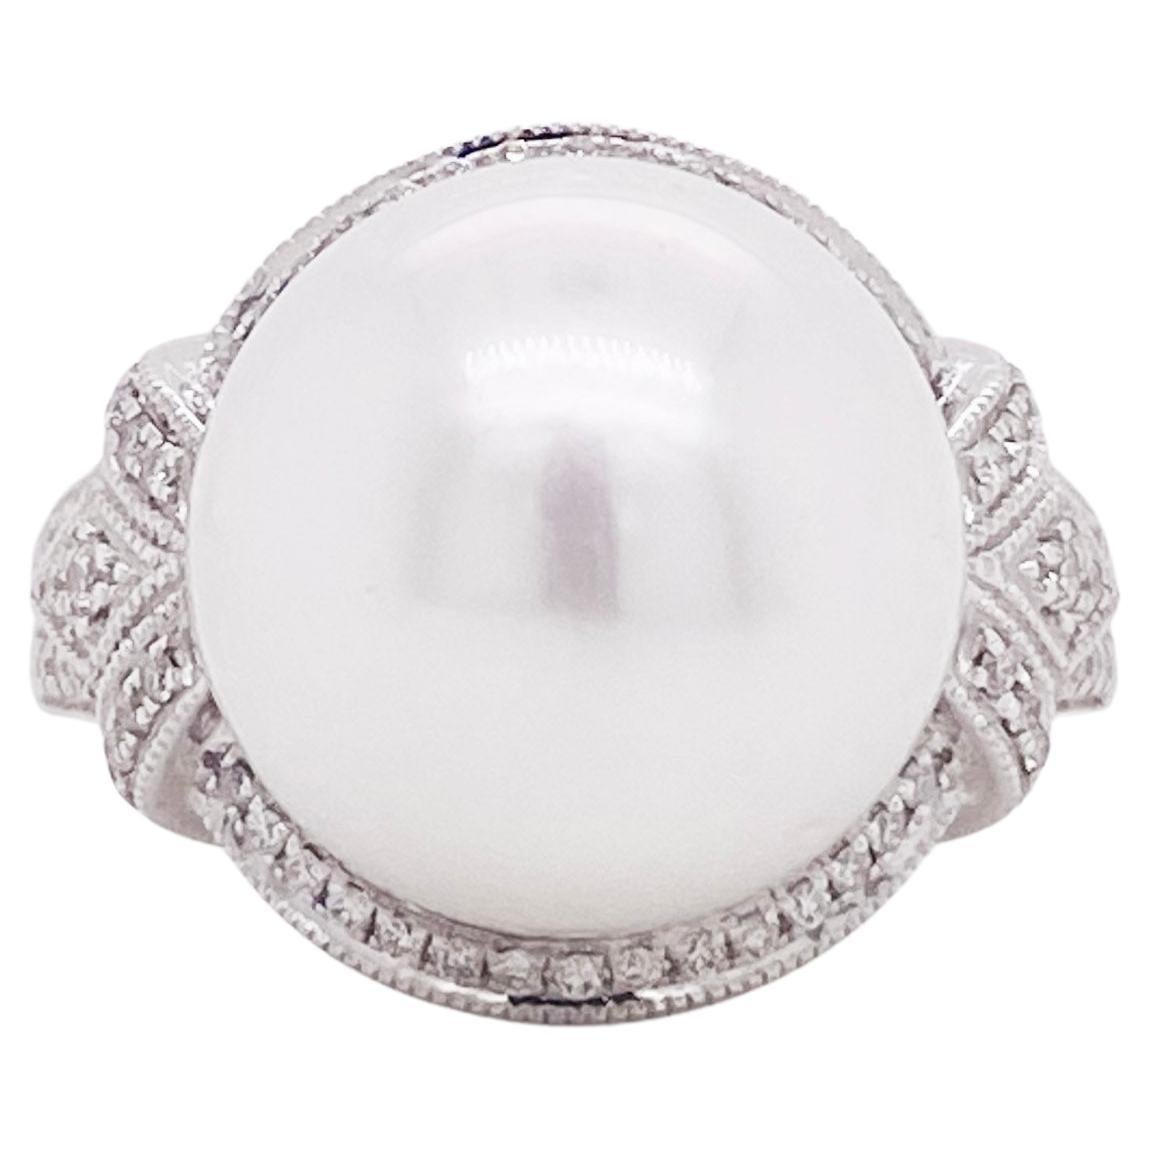 South Sea Pearl w Diamond Statement Ring, White Gold, Pearl Cultured